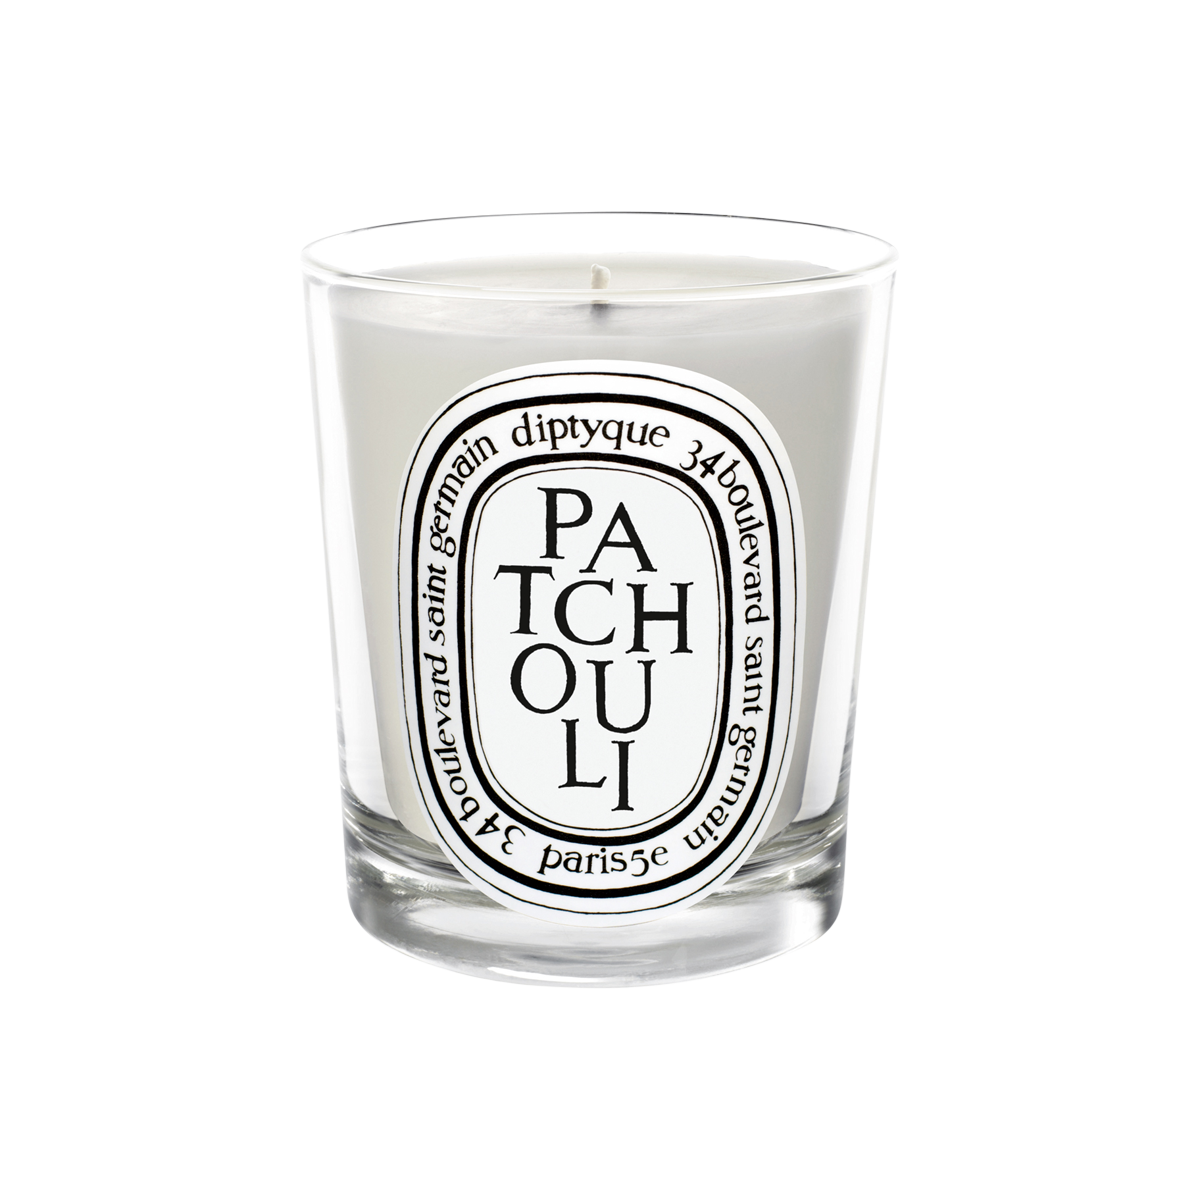 Diptyque - Patchouli Scented Candle